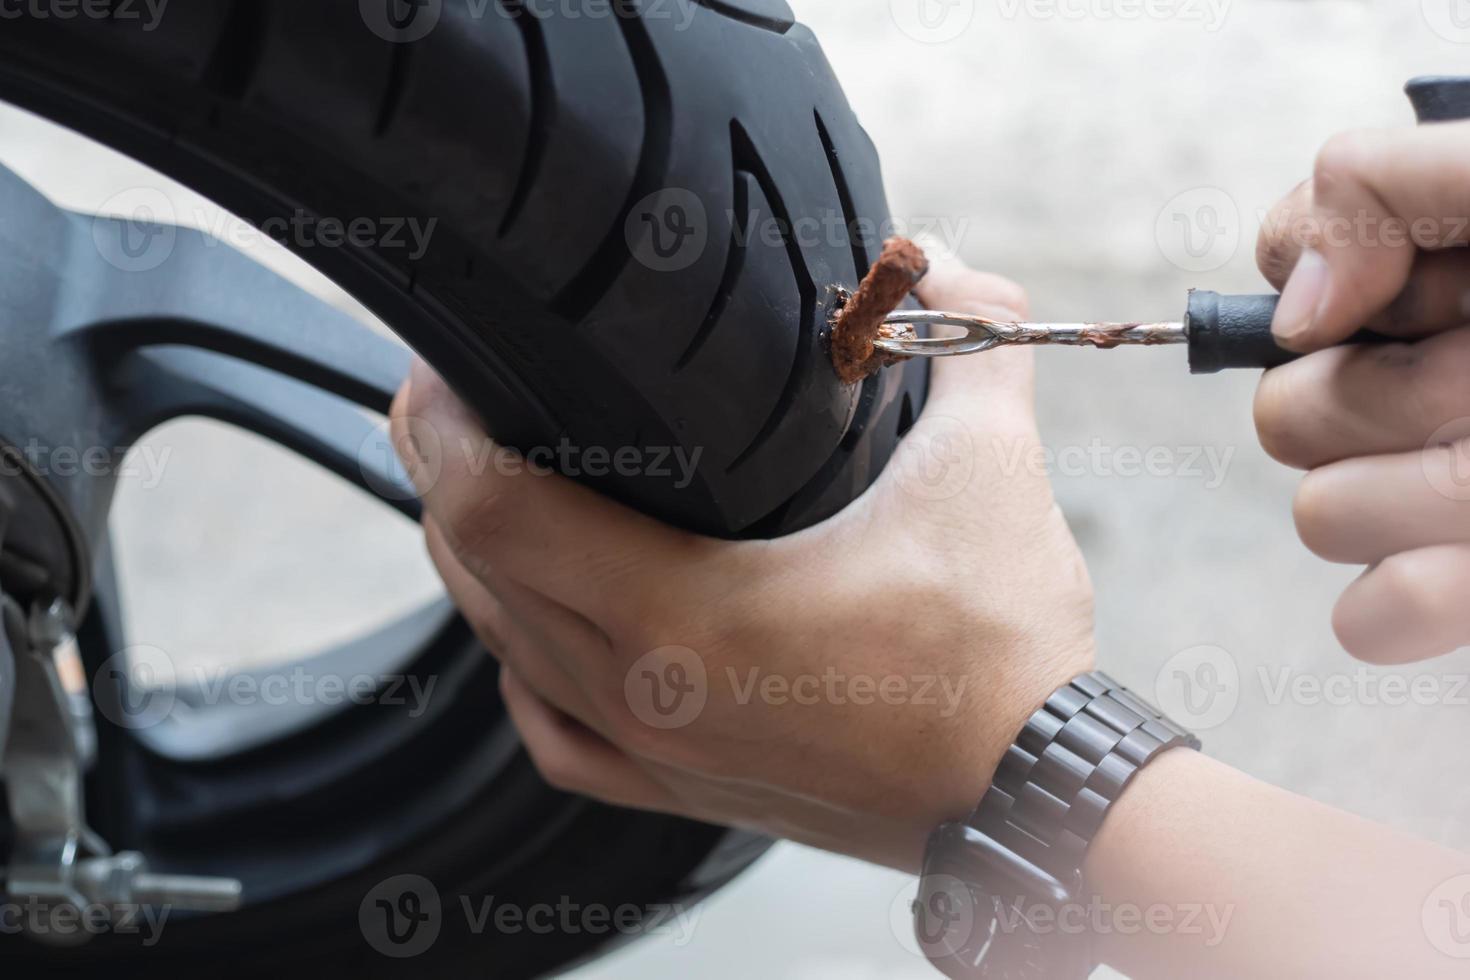 Rider use a tire plug kit and trying to fix a hole in tire sidewall ,Repair a motorcycle flat tire in the garage. motorcycle maintenance and repair concept photo